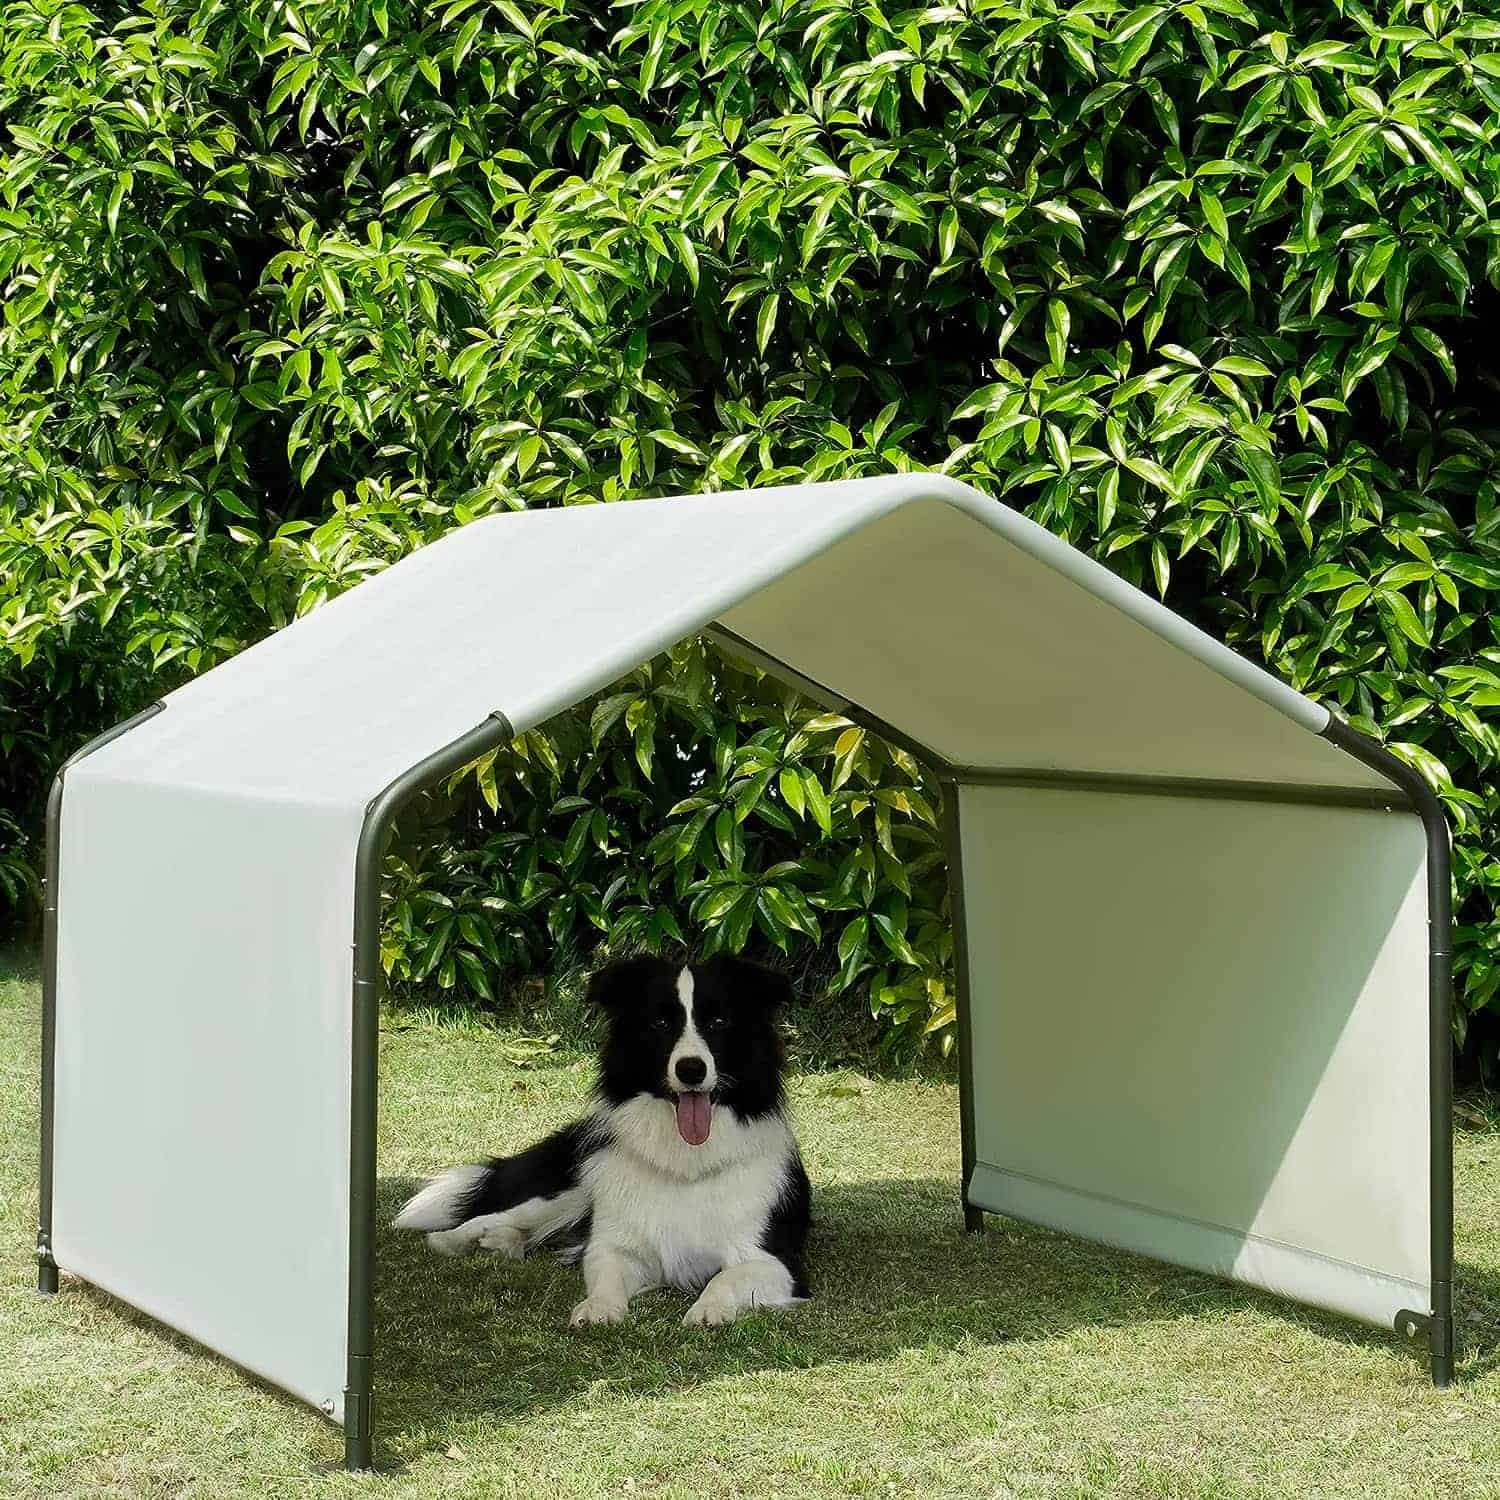 Beimo Dog Shade Shelter Outdoor Tent